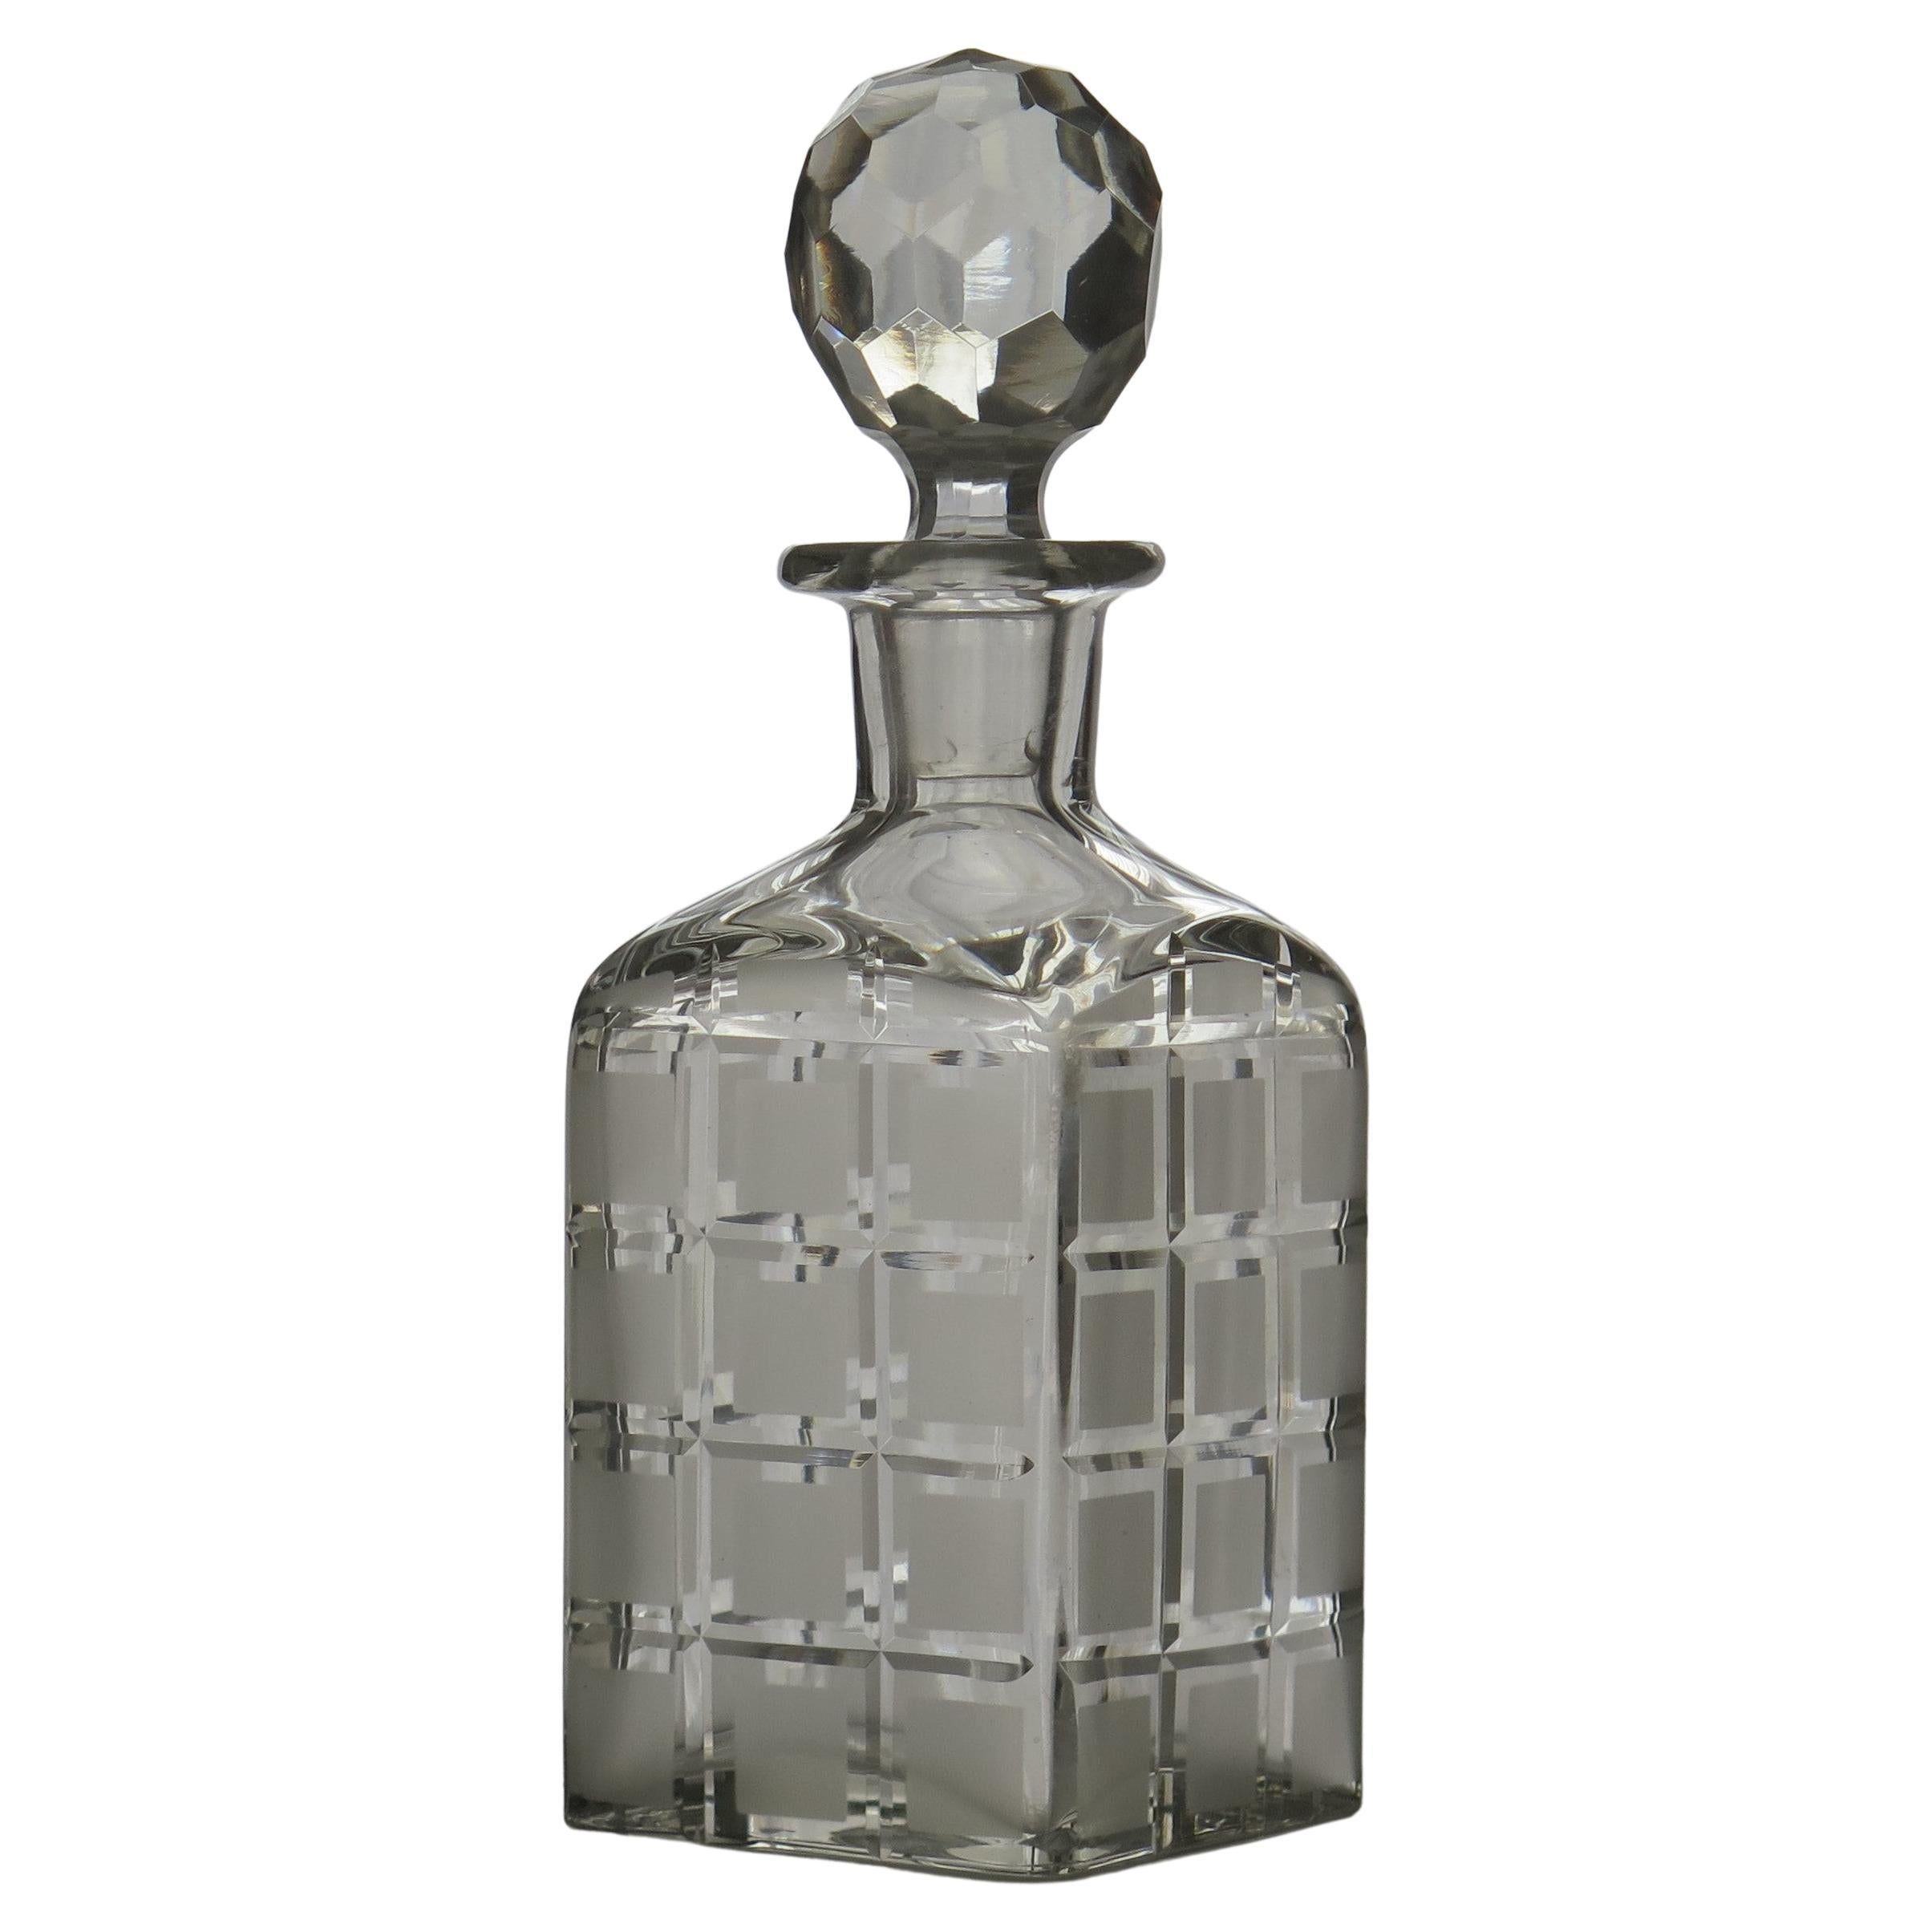 Edwardian Glass Decanter Square Cut and Etched, circa 1900